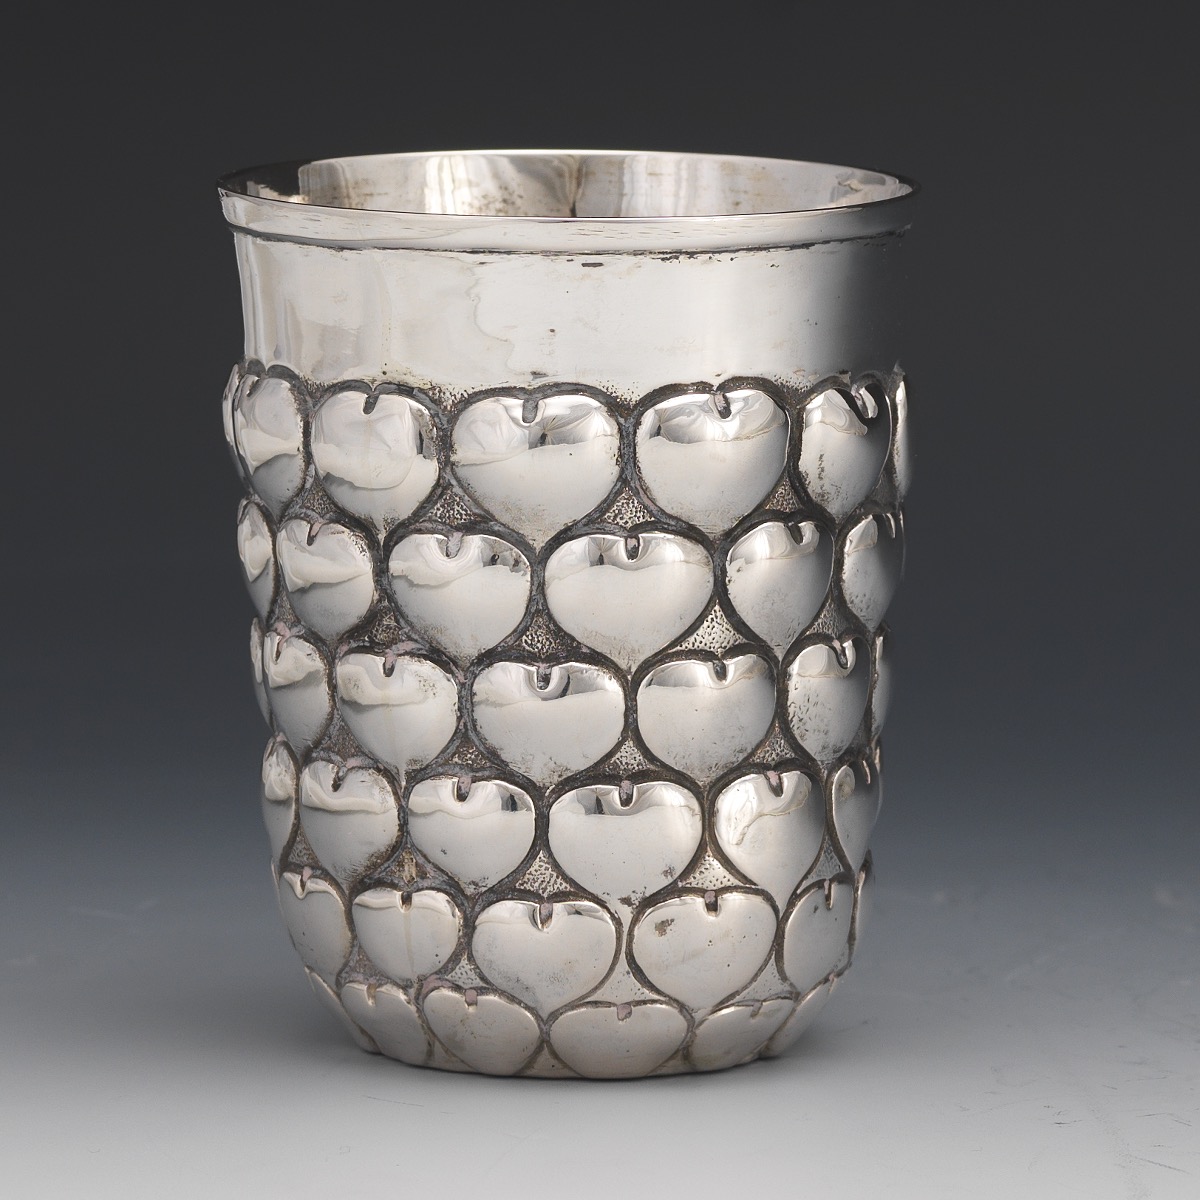 German Silver Cup in Style of Medieval 14th Century, by Ludwig Nereshelmer, Hanau - Image 3 of 7